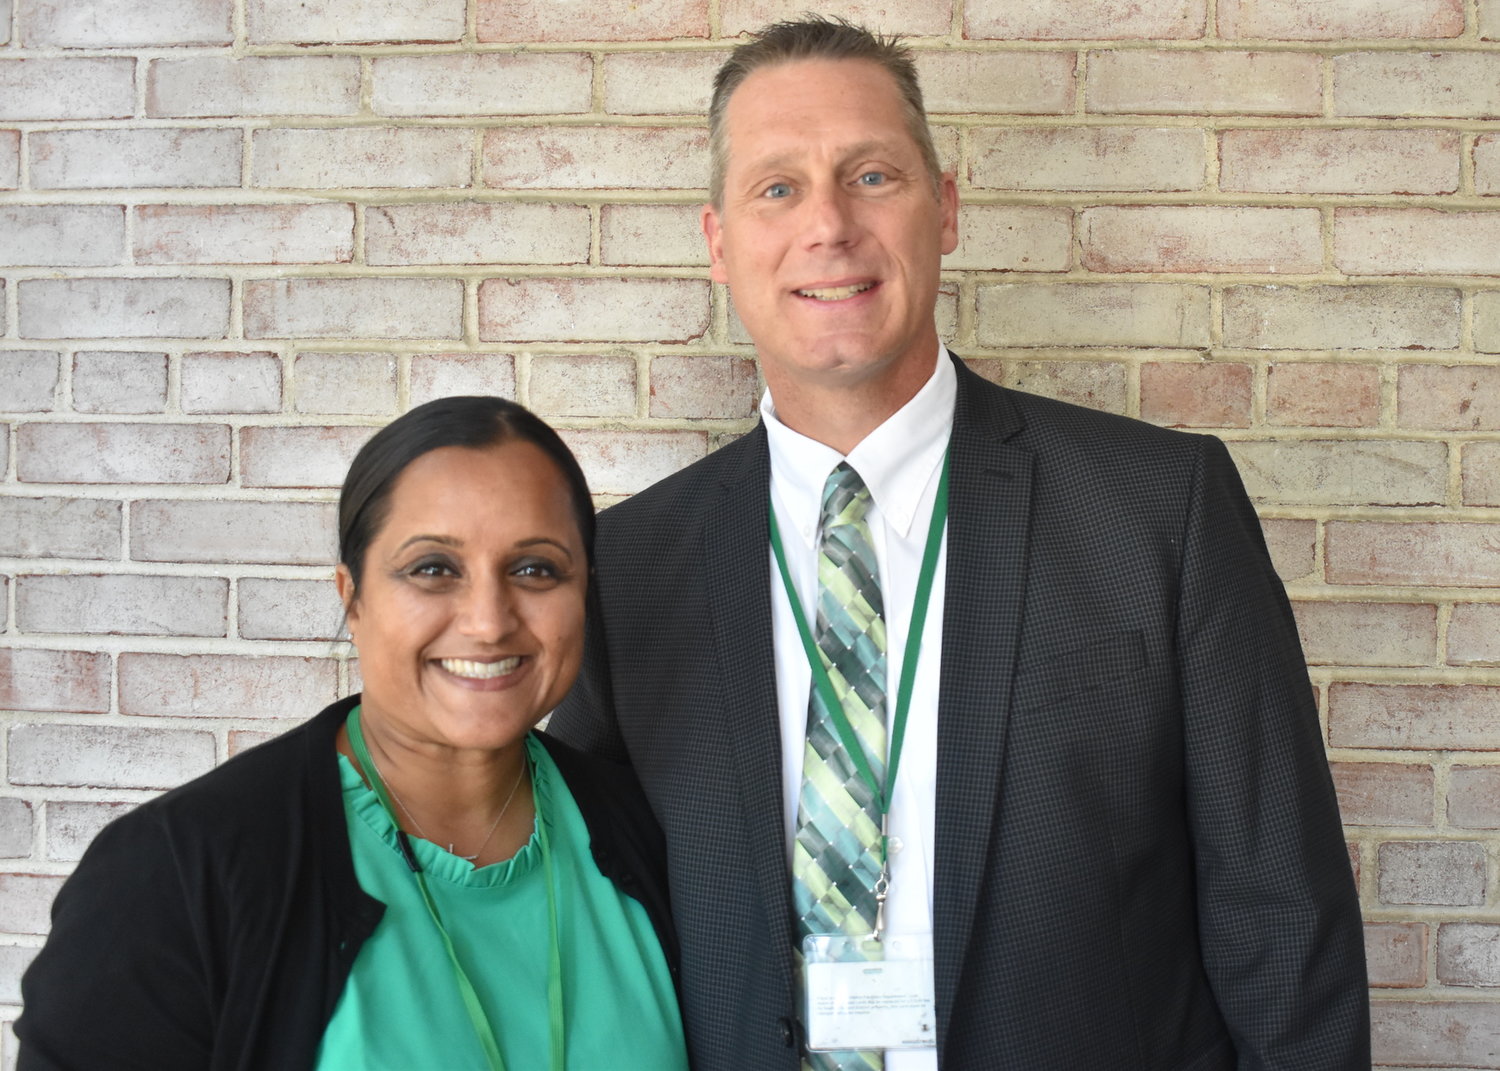 Sheena Jacob is Seaford’s new assistant superintendent for human resources, and Tom Lynch has been promoted to assistant superintendent for curriculum and technology.